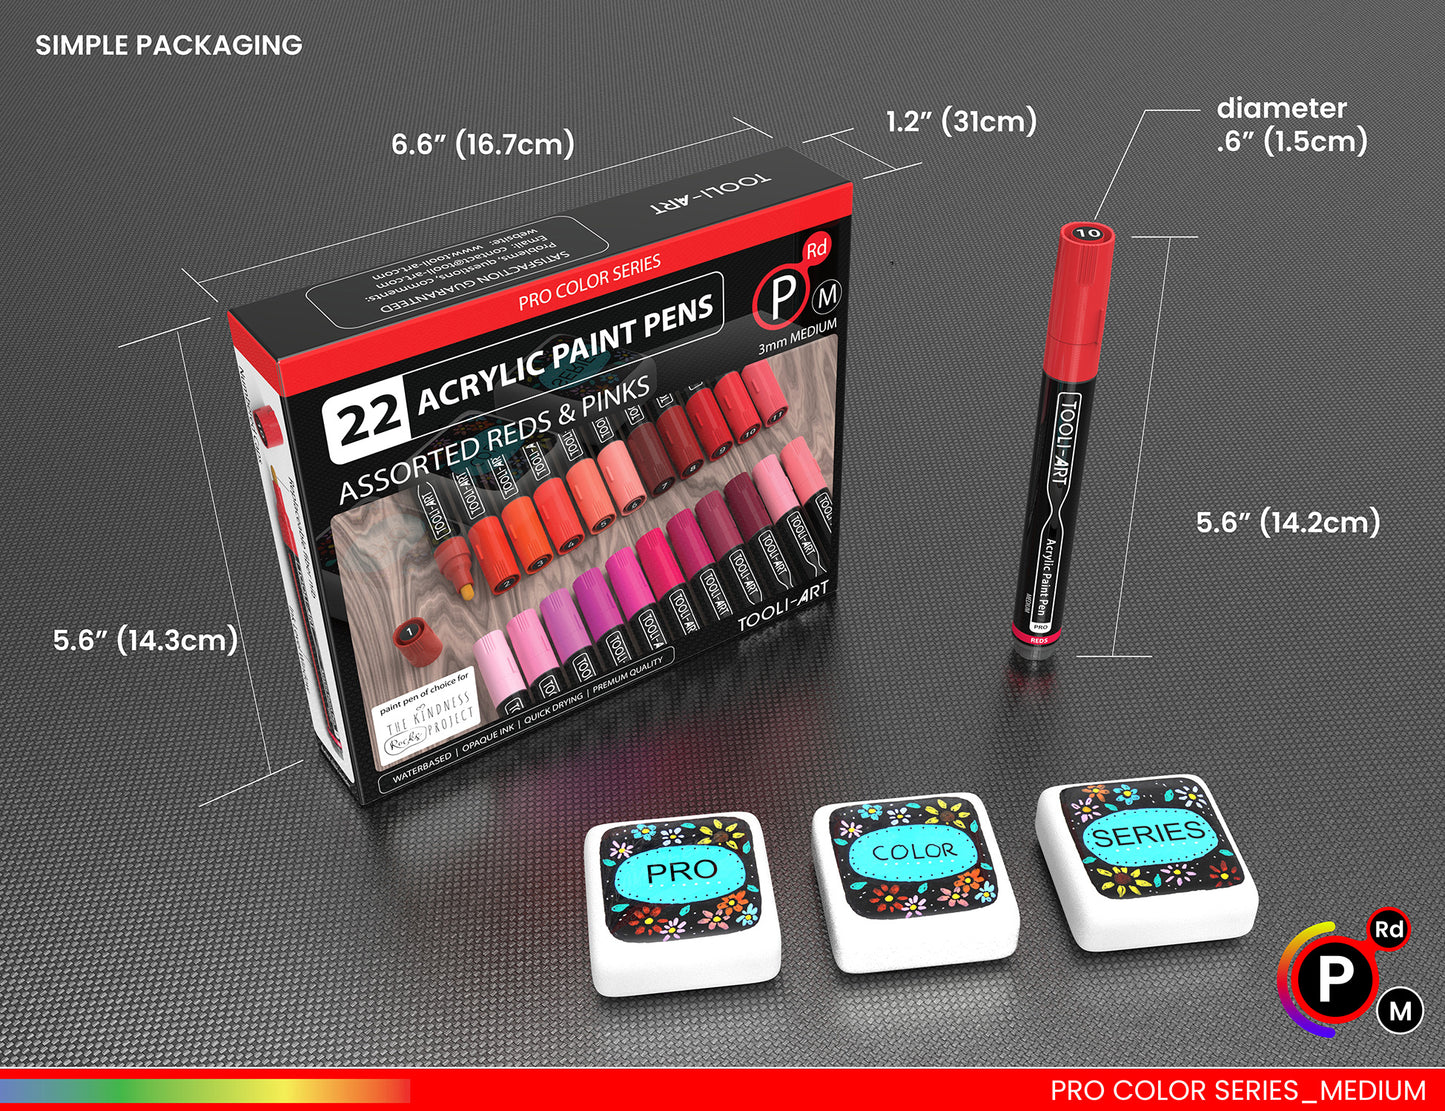 22 Acrylic Paint Pens (REDS AND PINKS) Pro Color Series Set (3mm MEDIUM)